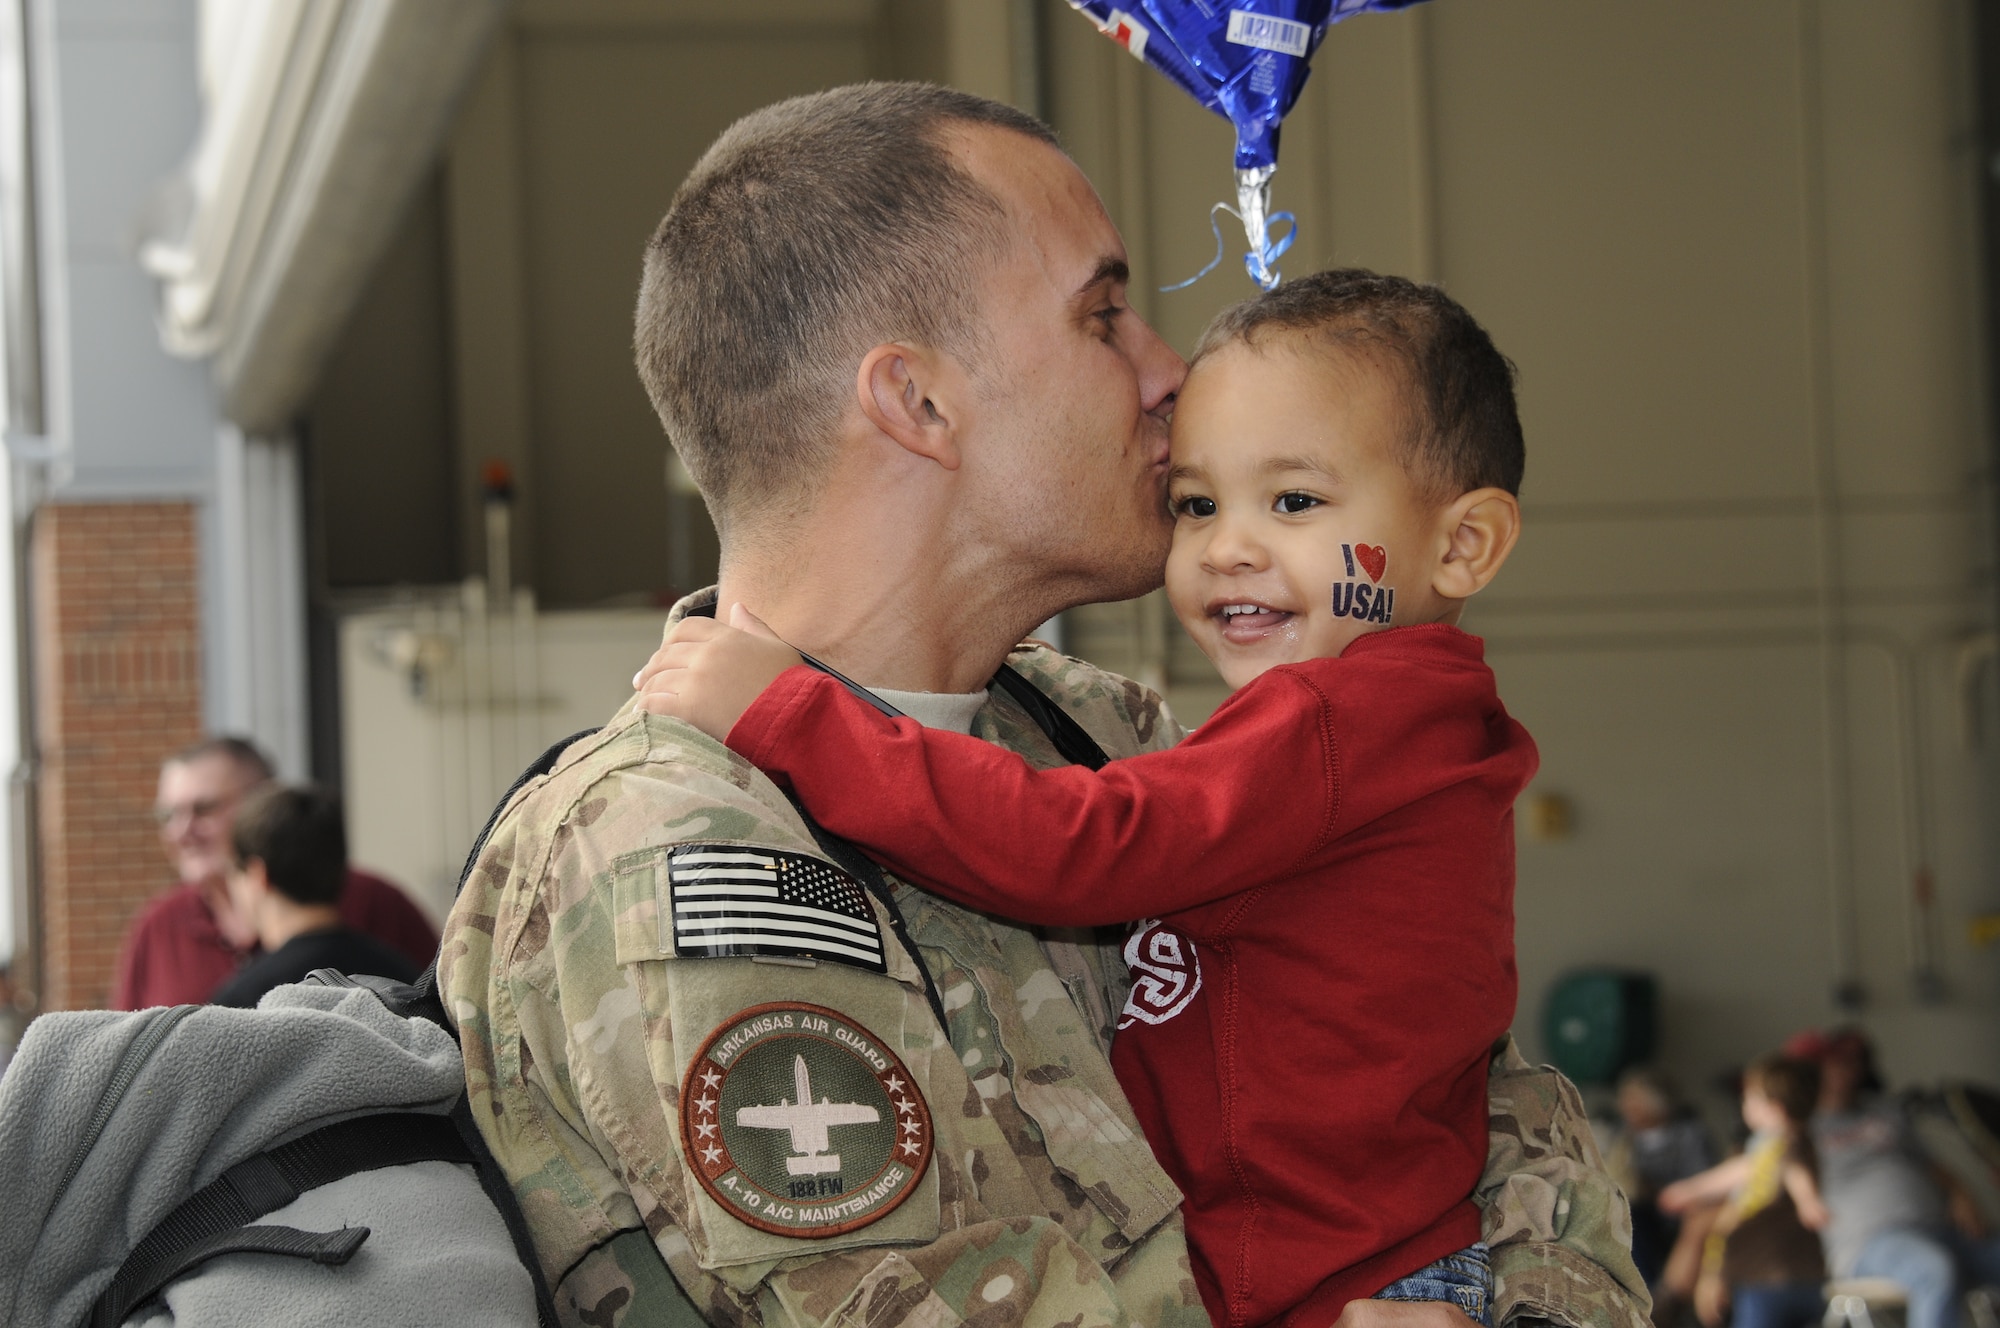 A returning 188th Fighter Wing member kisses his son upon returning from a deployment to Afghanistan Oct. 12, 2012. Approximately 280 Airmen with the 188th Fighter Wing returned to Fort Smith, Ark., from a deployment to Bagram Airfield, Afghanistan Oct. 12. (National Guard photo by Senior Airman Hannah Landeros/188th Fighter Wing Public Affairs)